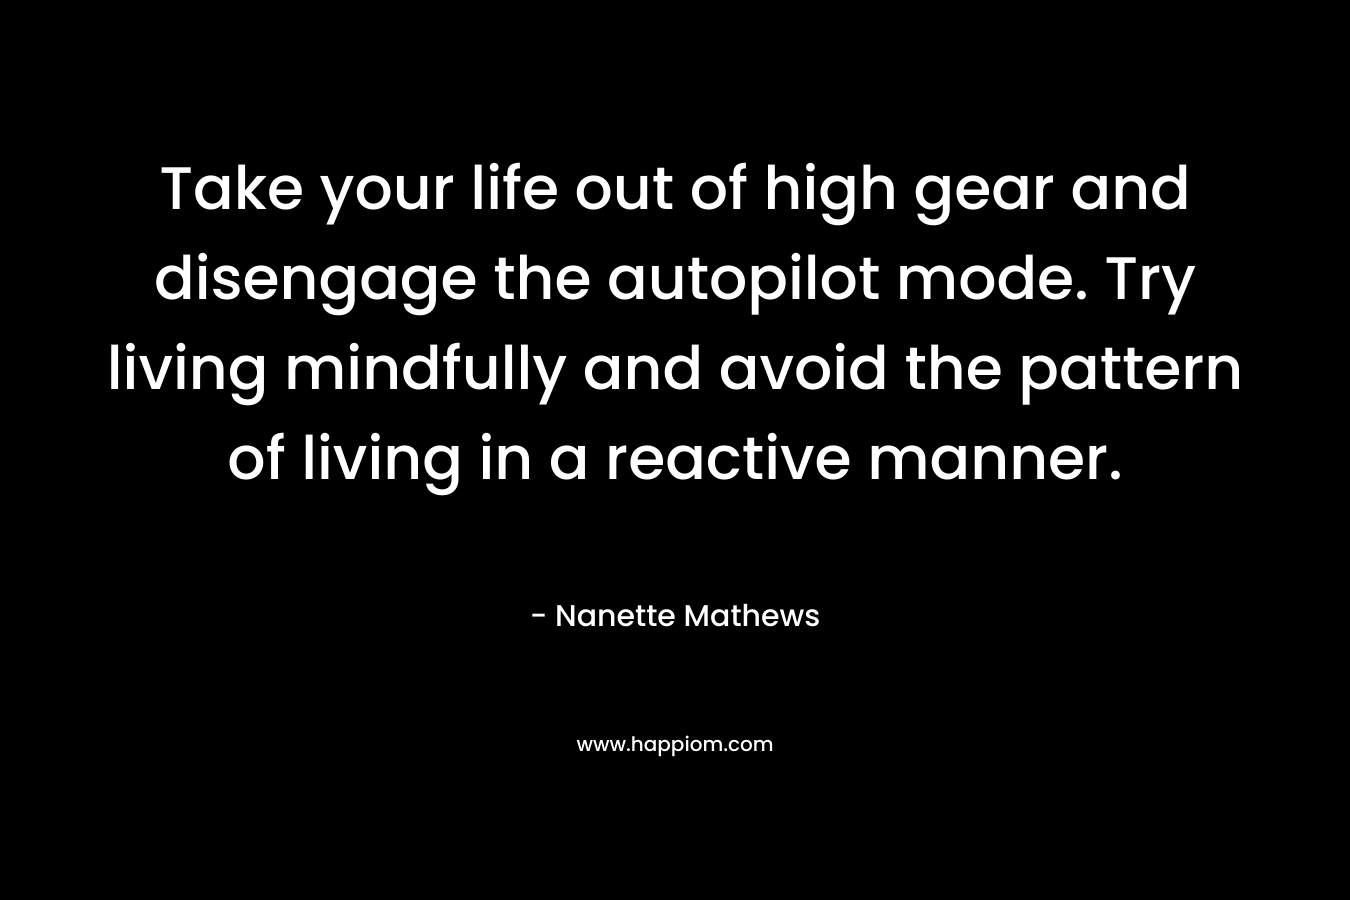 Take your life out of high gear and disengage the autopilot mode. Try living mindfully and avoid the pattern of living in a reactive manner.